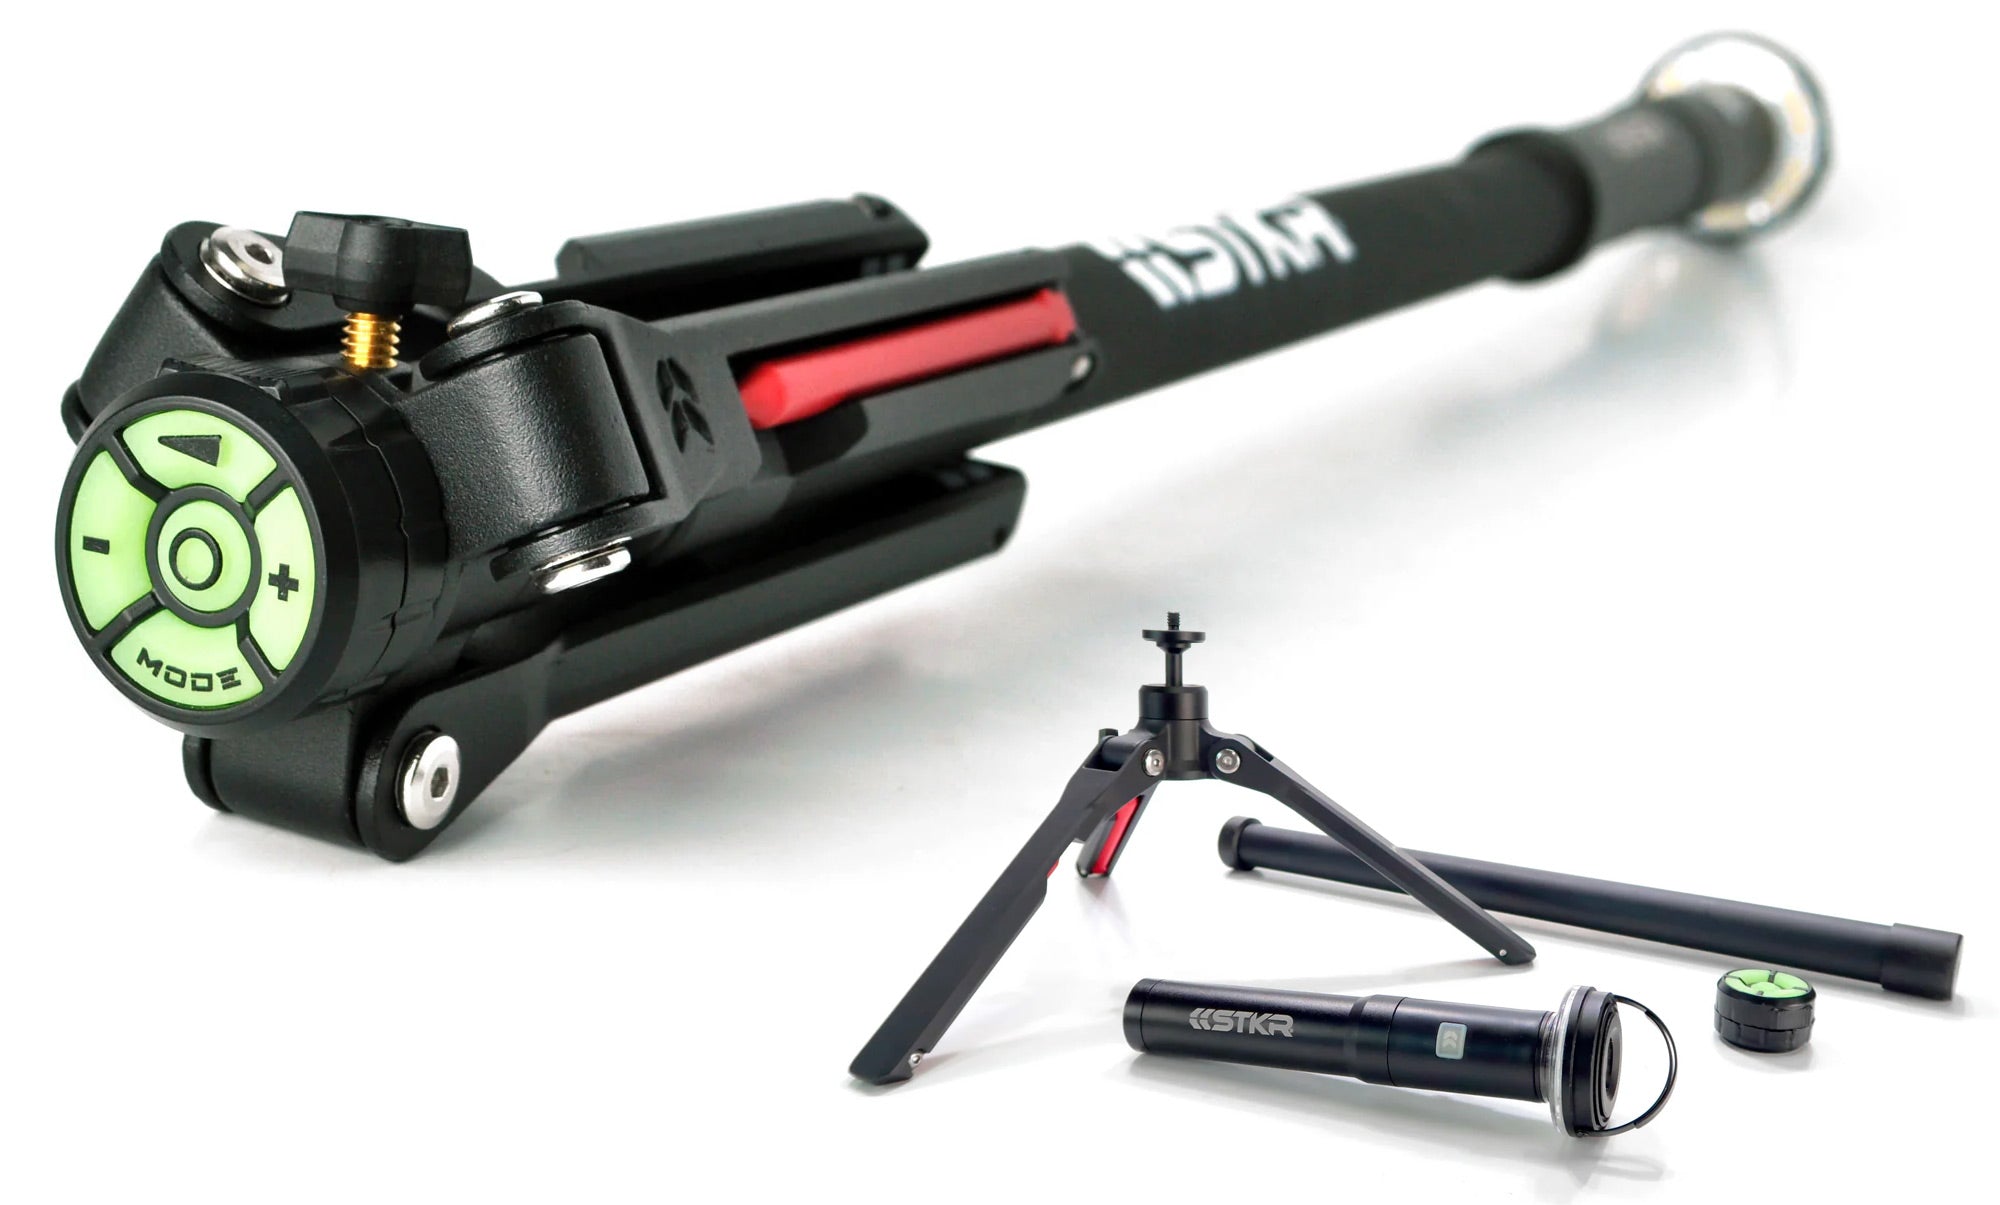 Breaks down for easy compact storage/transportation | FLi-PRO 8' Telescoping Light by STKR Concepts